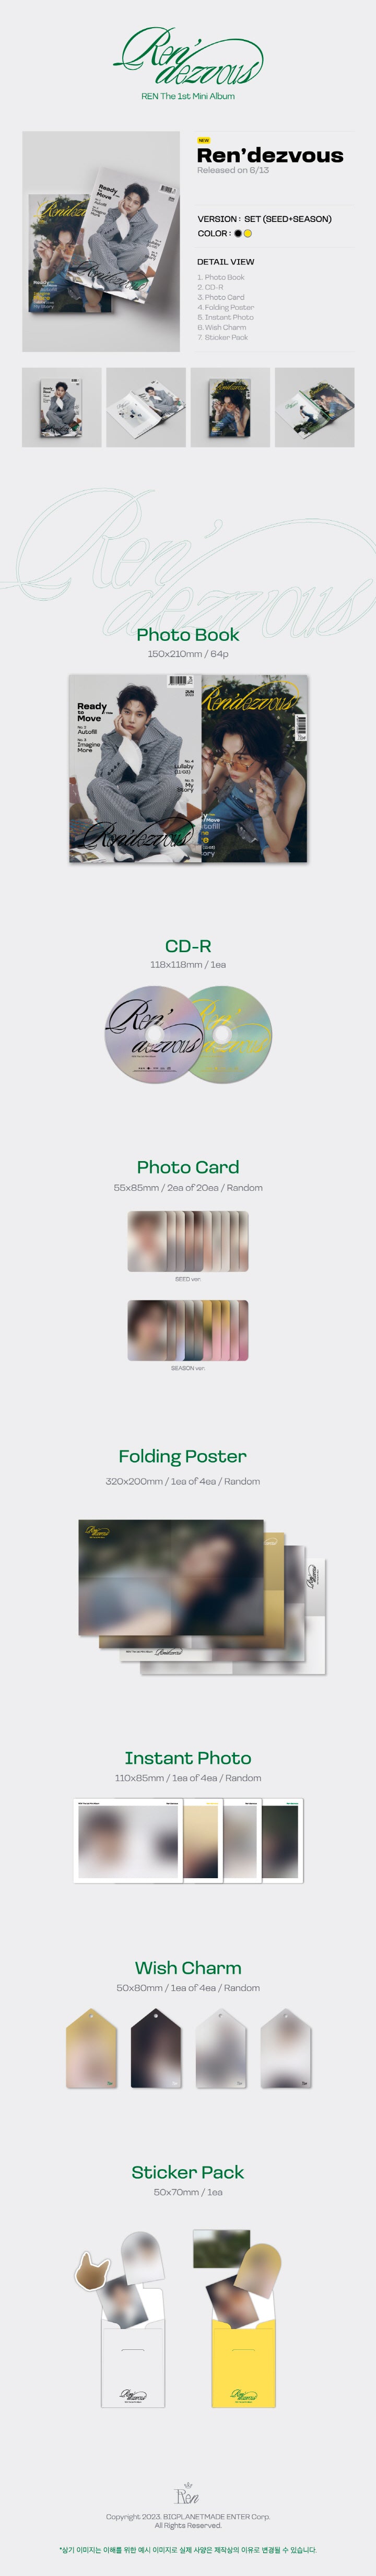 1 CD
1 Photobook (64 pages)
2 Photo Cards (random out of 20 types)
1 Folding Poster (random out of 4 types)
1 Instant Phot...